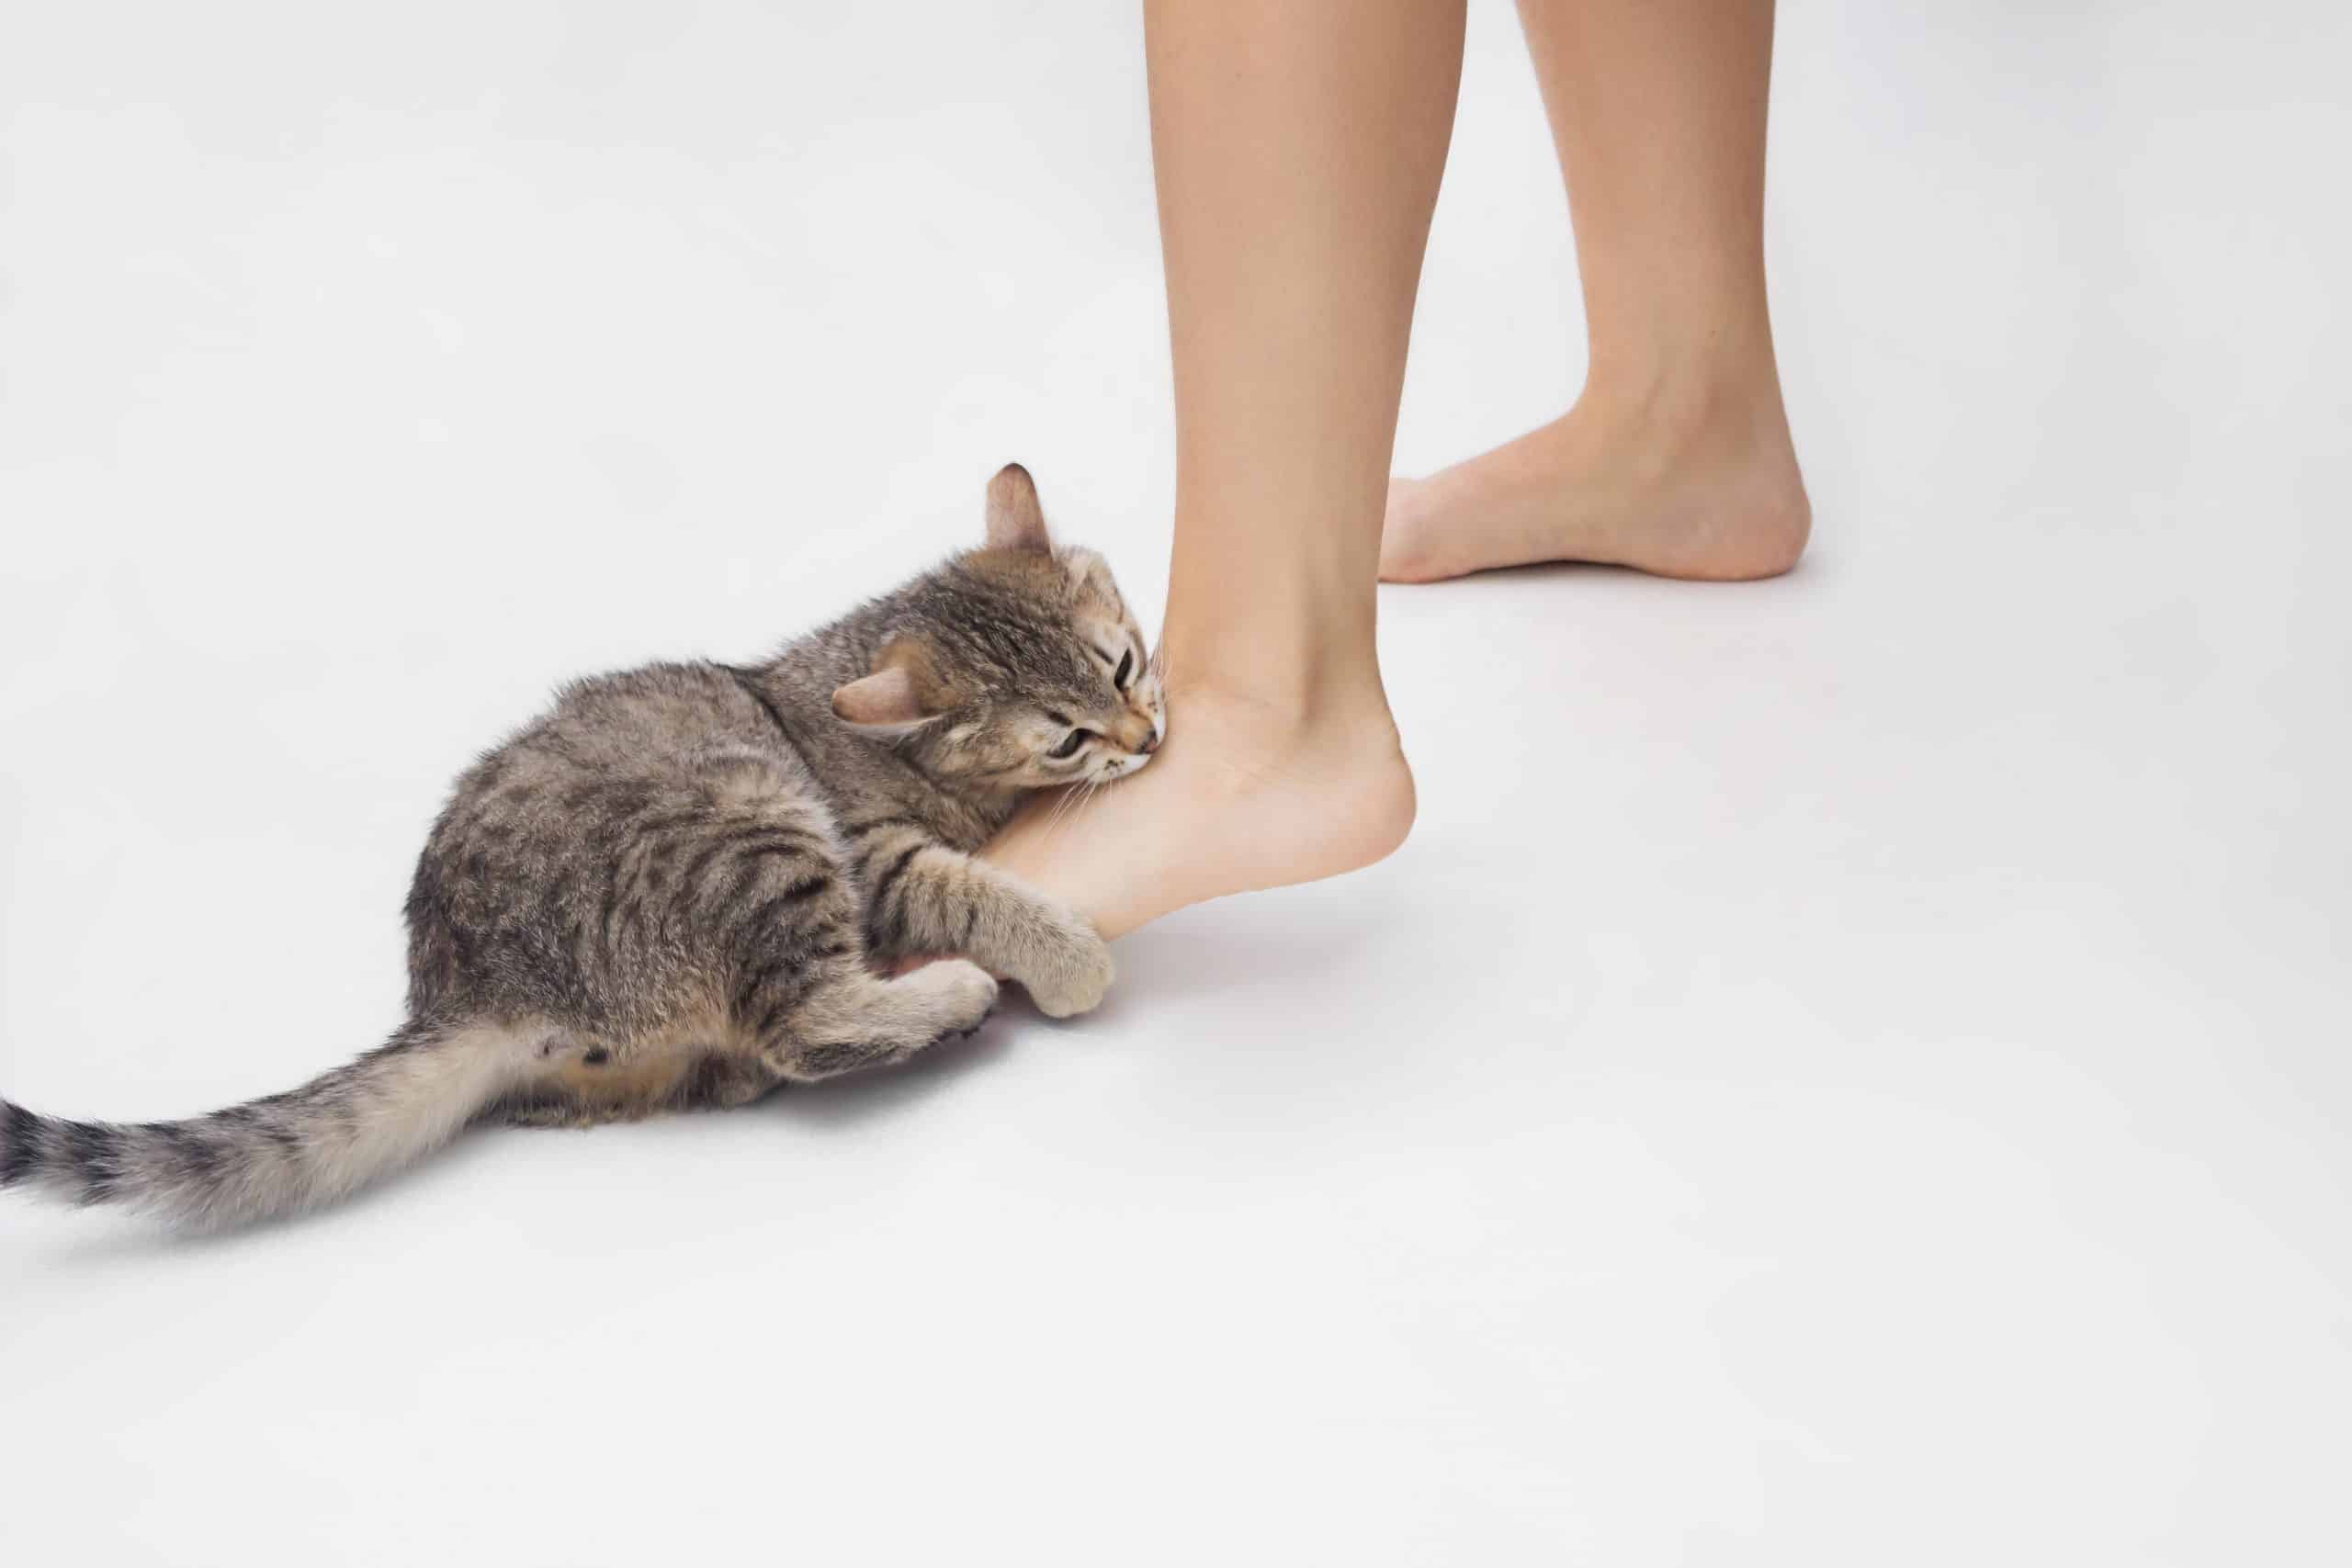 A young tabby cat bites a woman's feet. Cute kitten is playing with owner's feet isolated on white background. Bad behavior of pet. Naughty cat biting an ankle